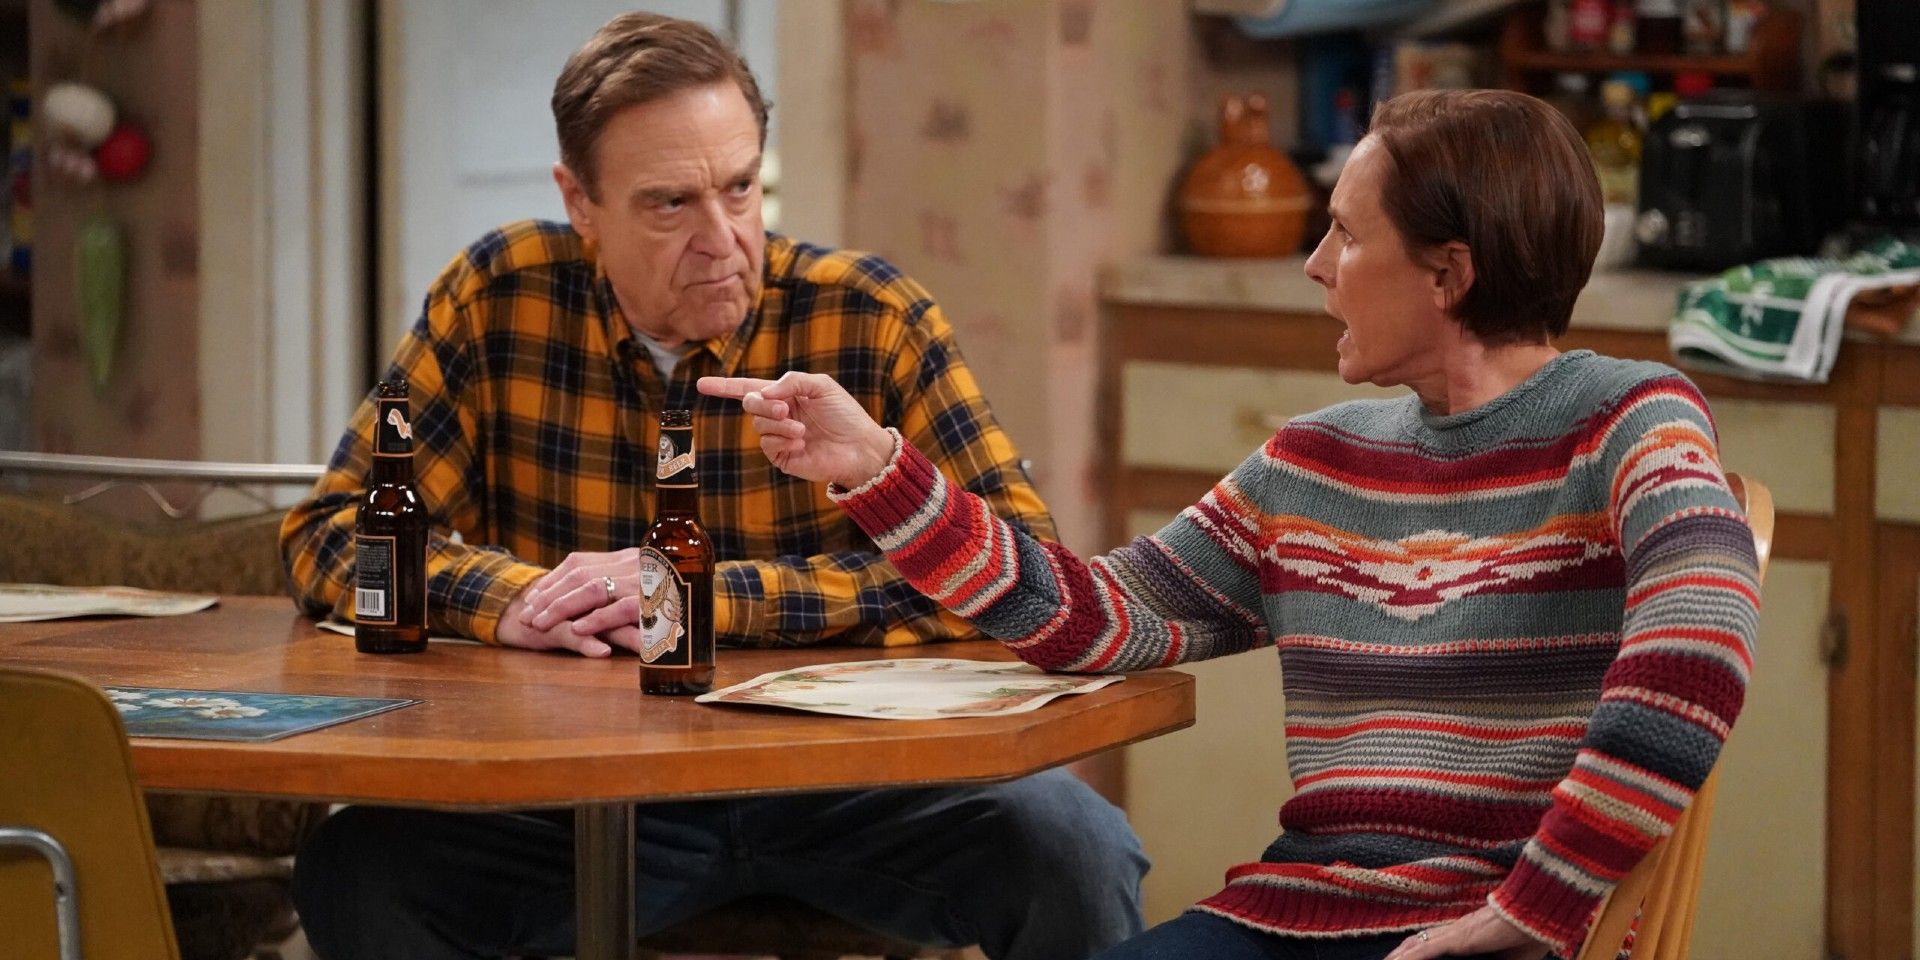 The Conners' Dan (John Goodman) stares at an angry, pointing Jackie (Laurie Metcalf).